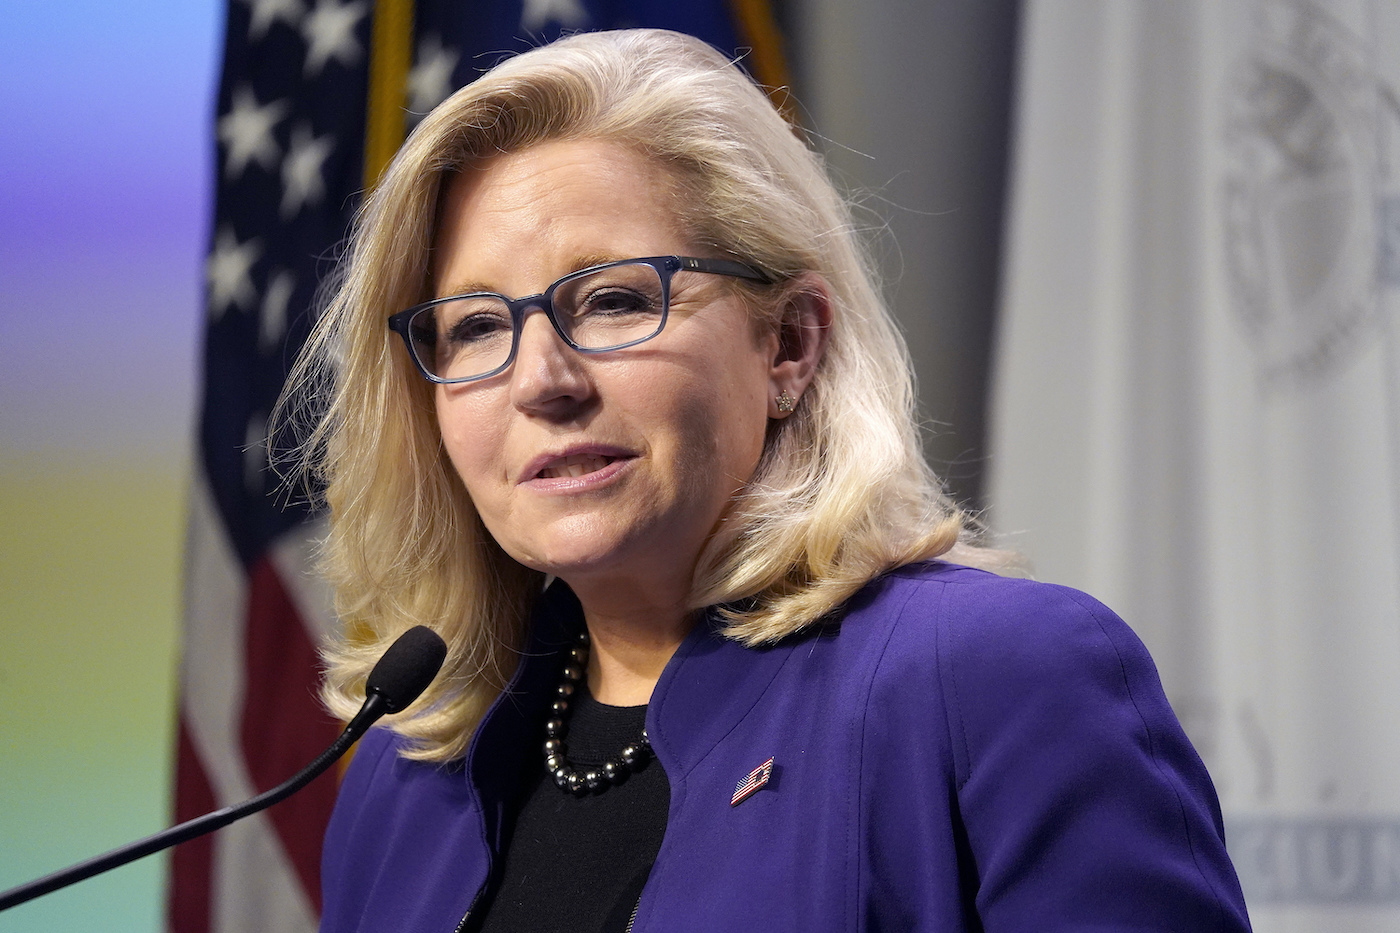 Rep. Liz Cheney says Trump is at war ‘with the rule of law